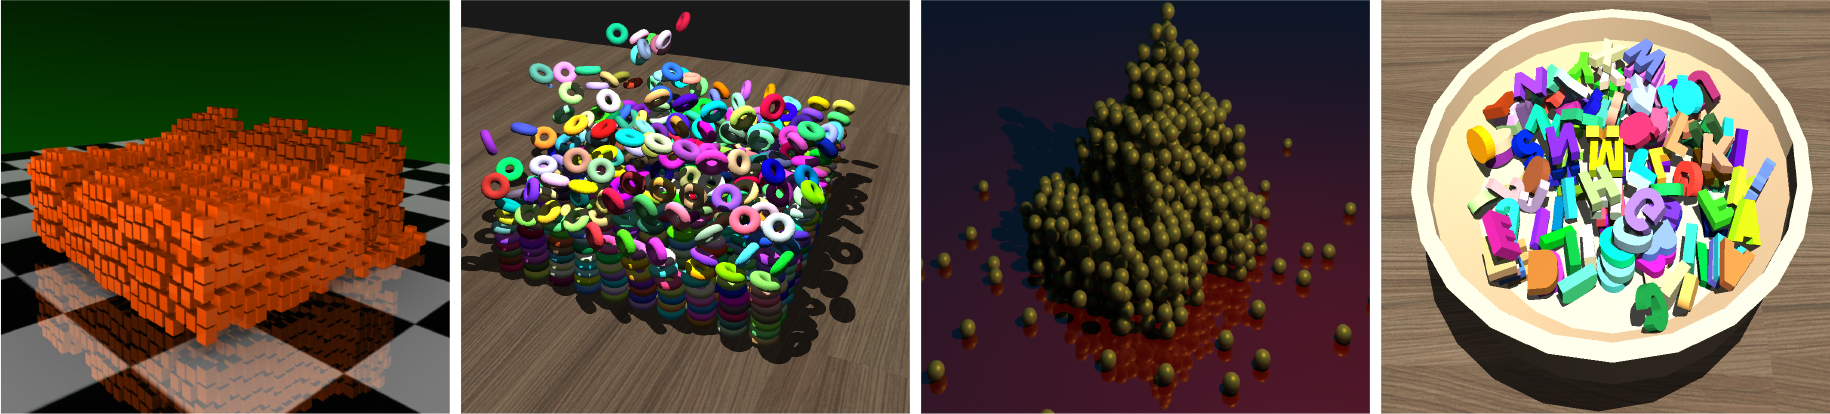 Benchmark: Four virtual environments used during simulation tests - (a) Cubes - (b) Torus - (c) Spheres - (d) Alphabet letters.